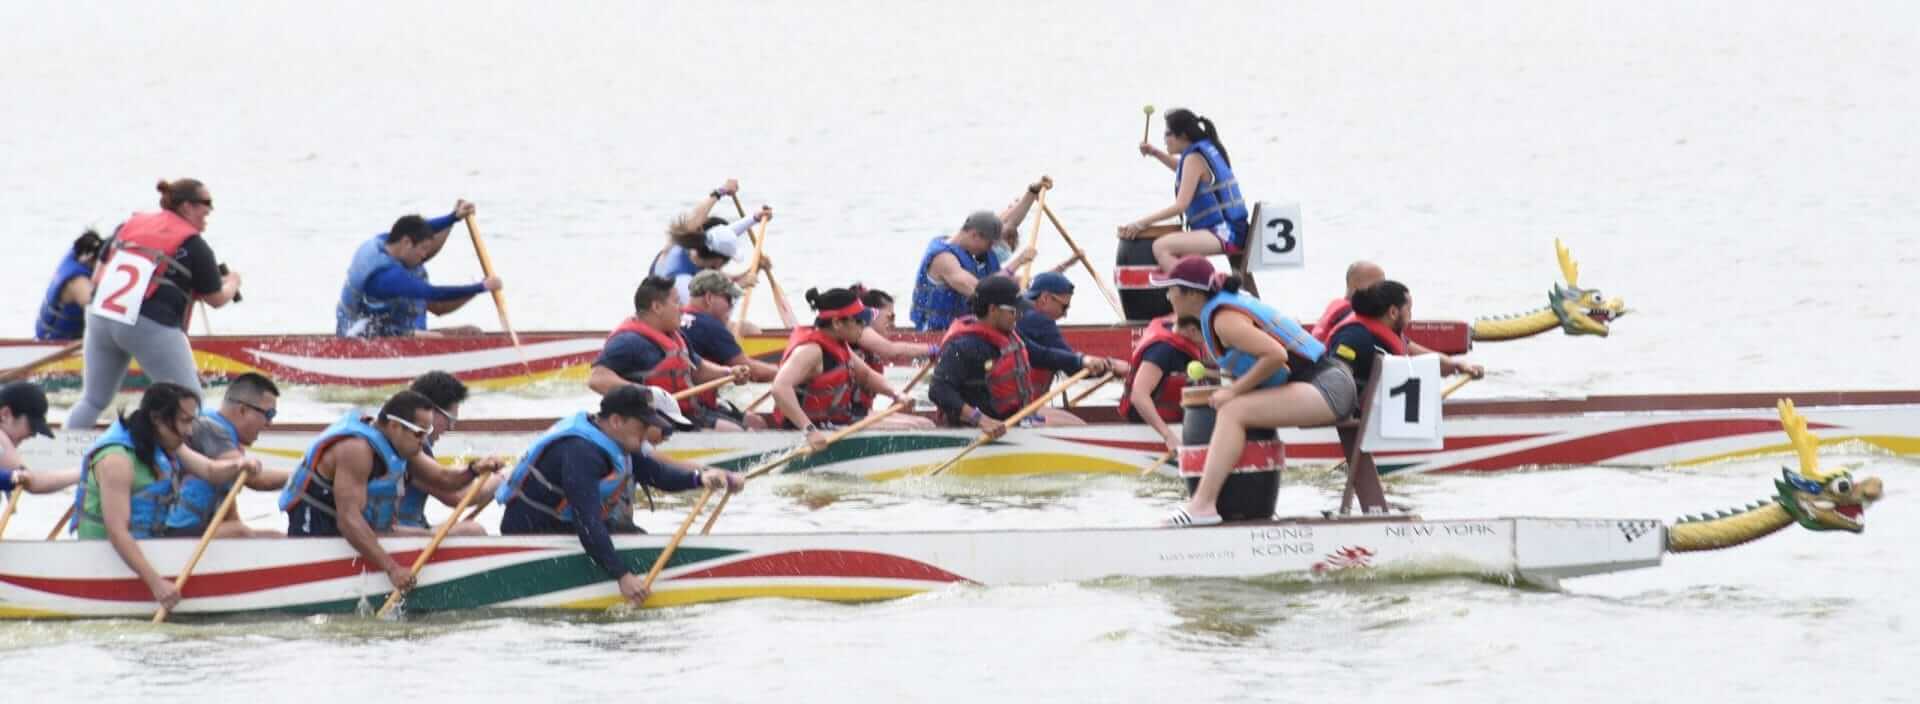 Rowers competing at the Hong Kong Dragon Boat Festival in NY